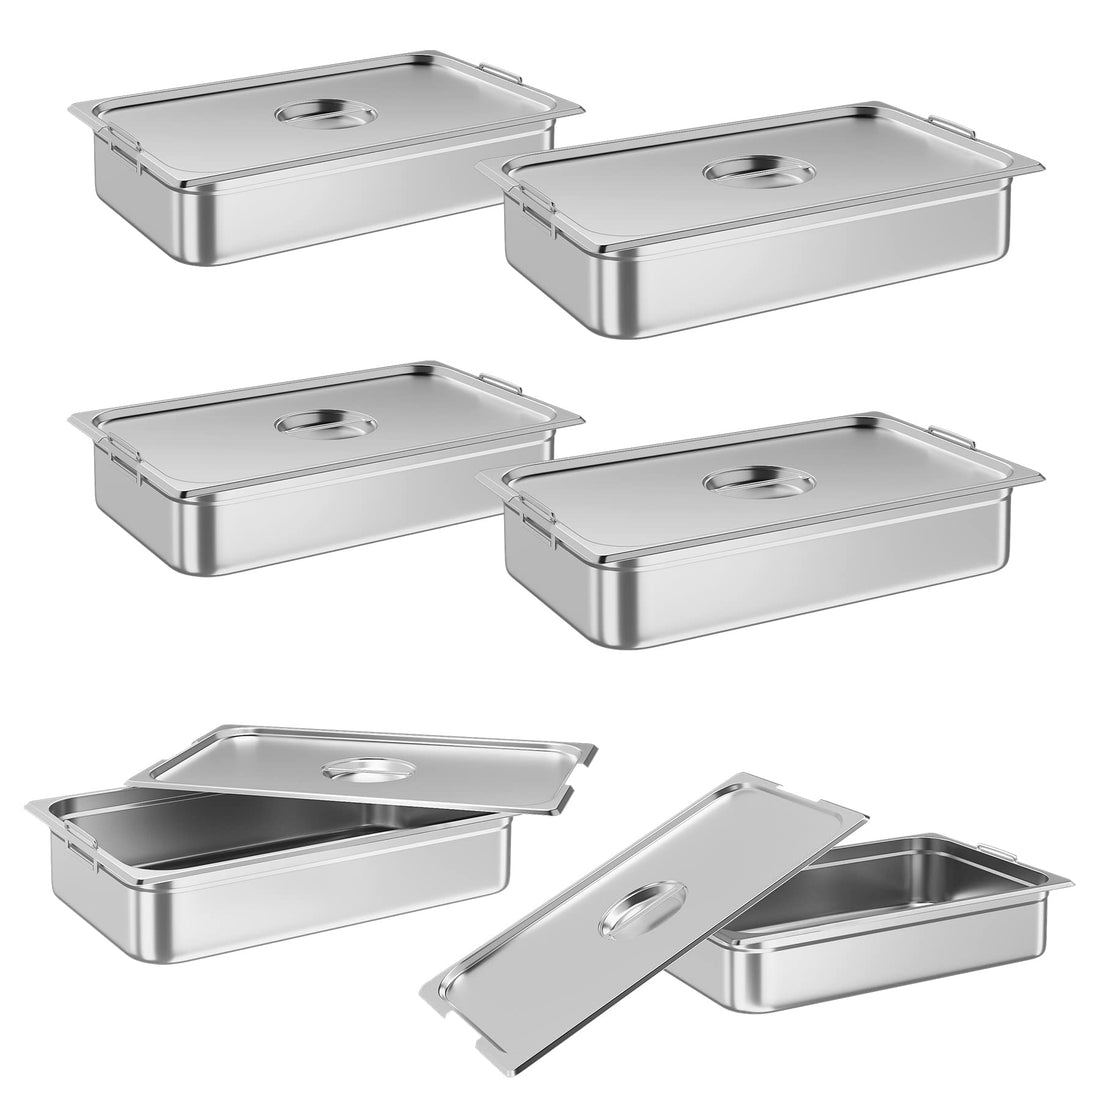 6 Pack Full Size Hotel Pan Commercial Stainless Steel Anti-Jamming Steam Table Pan